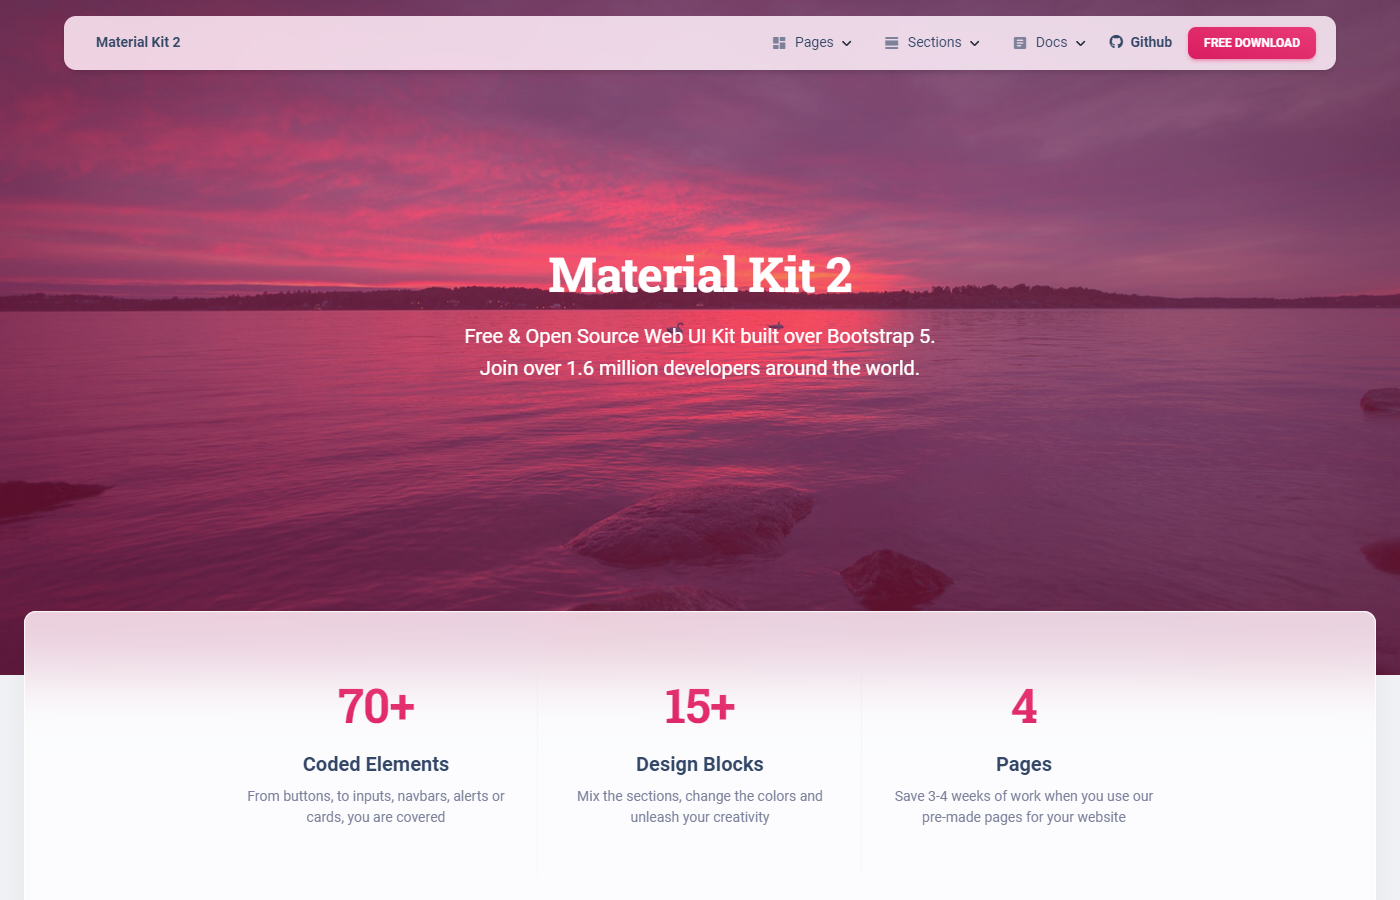 Material Kit 2 is a free UI kit template 